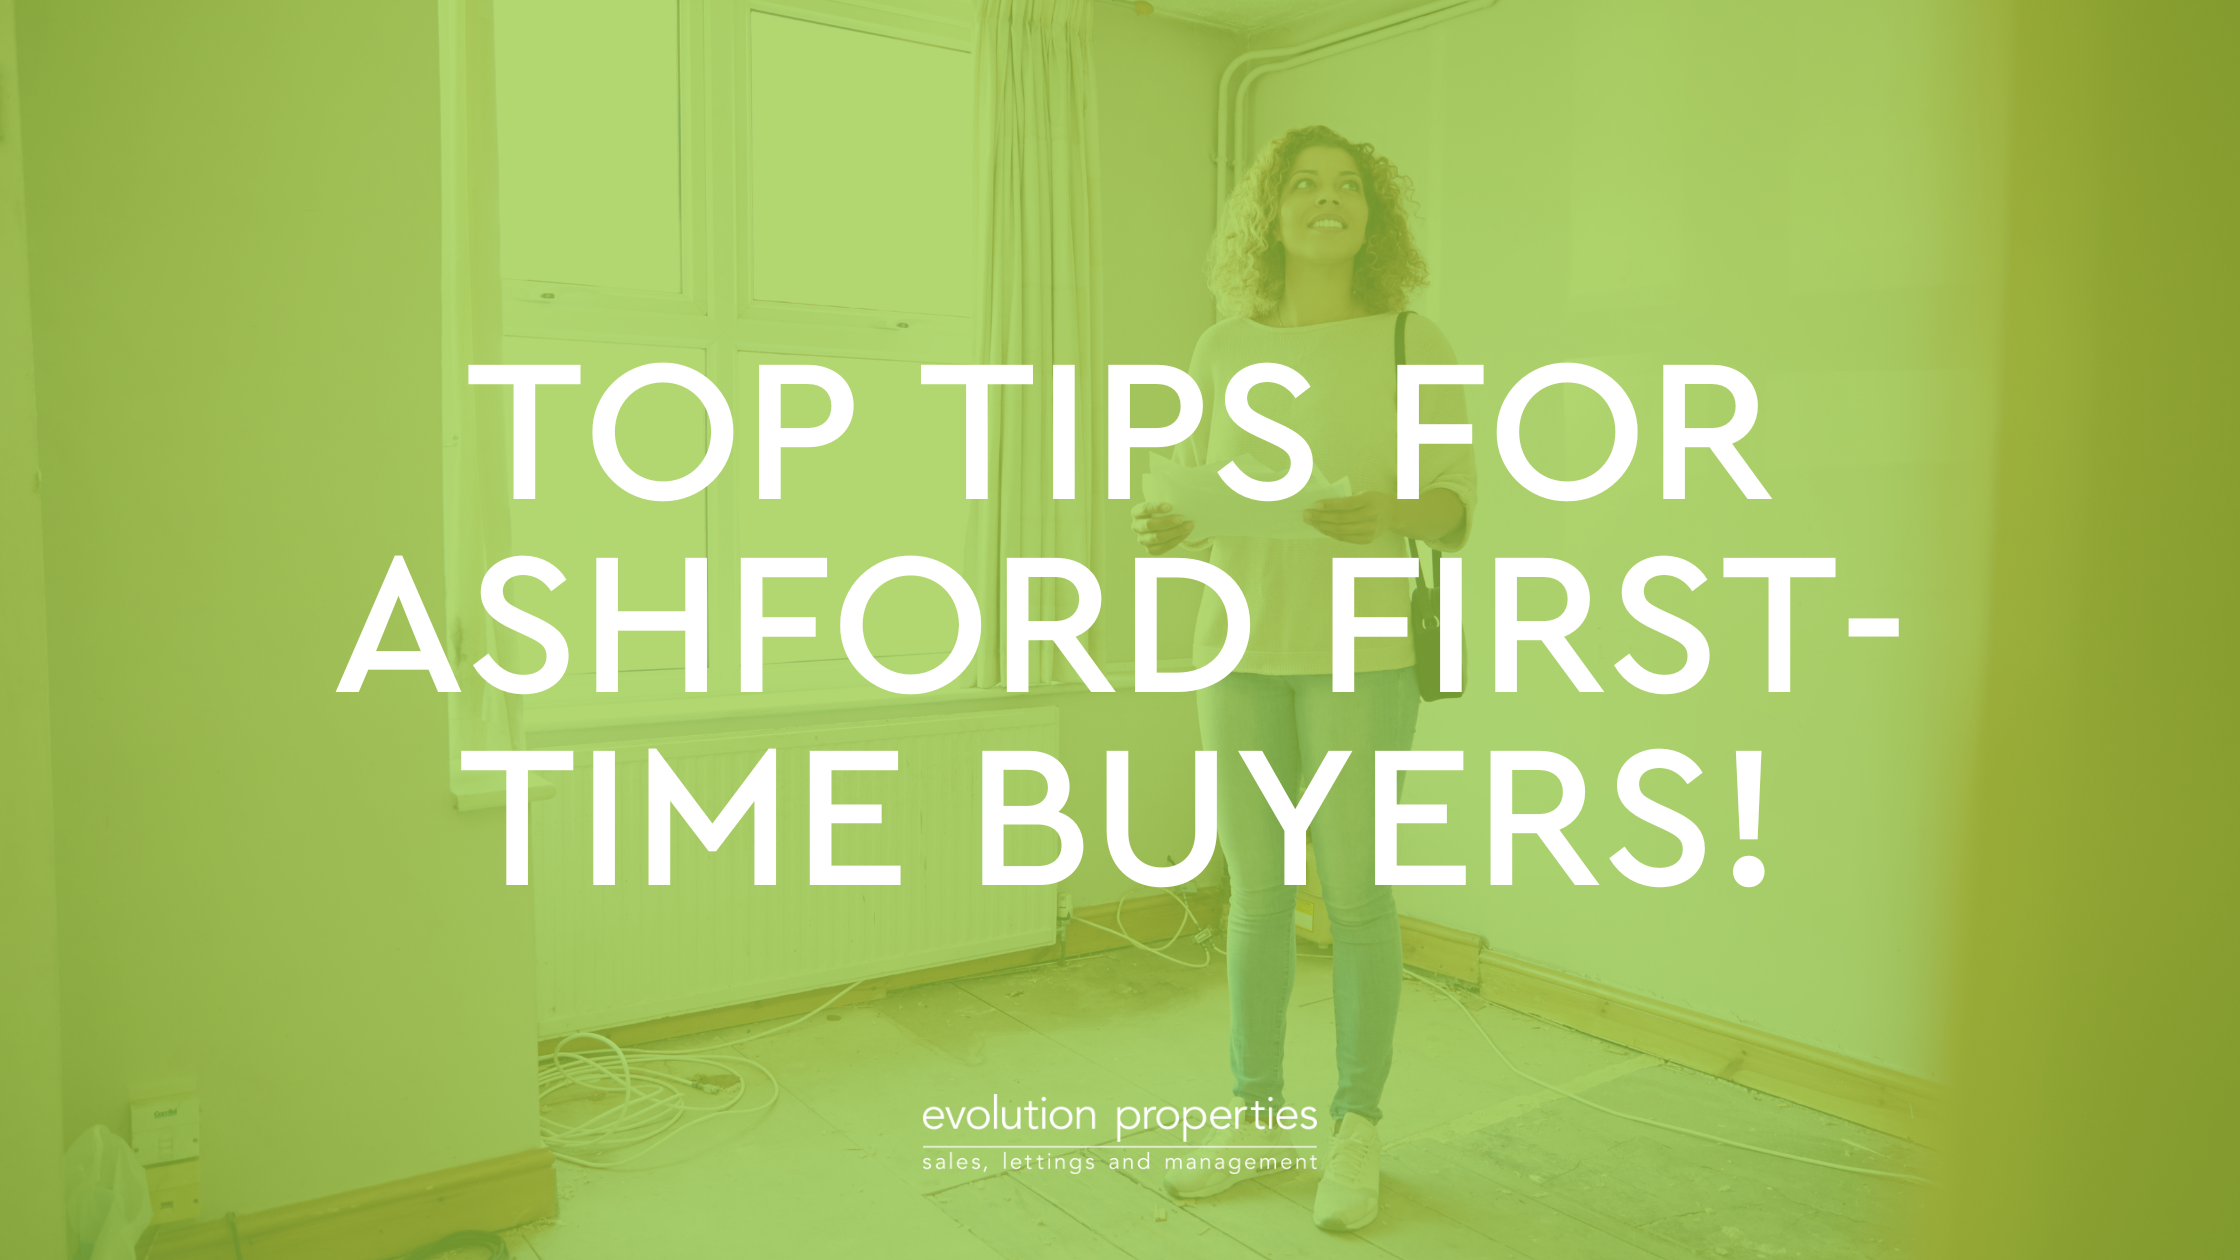 Top Tips For Ashford First-Time Buyers!